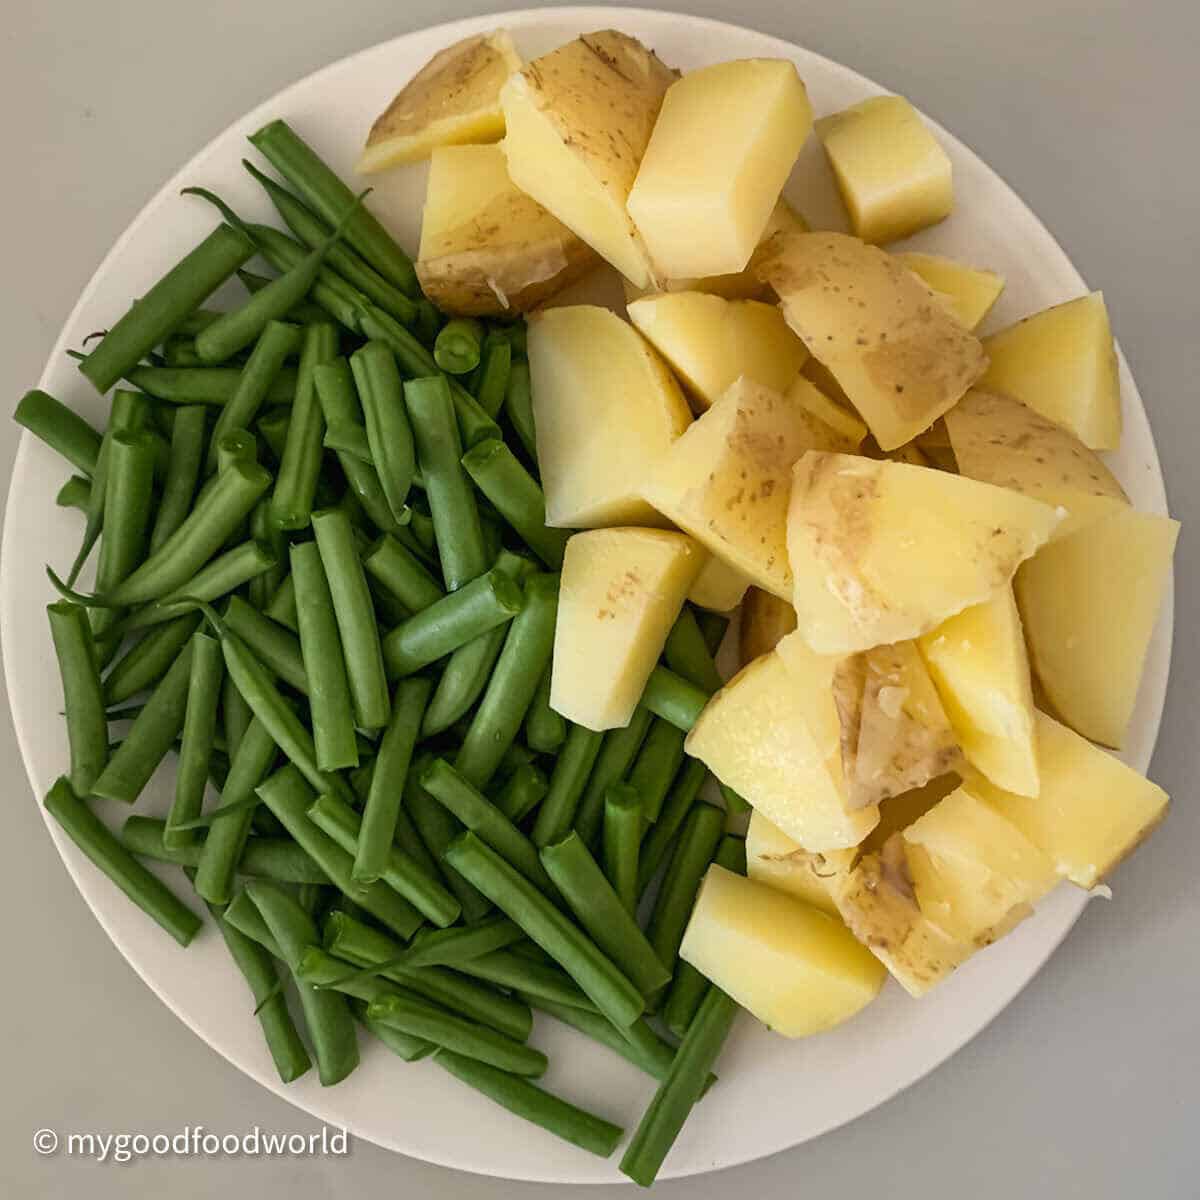 Chopped potatoes and french beans placed in a white plate on a light grey background.